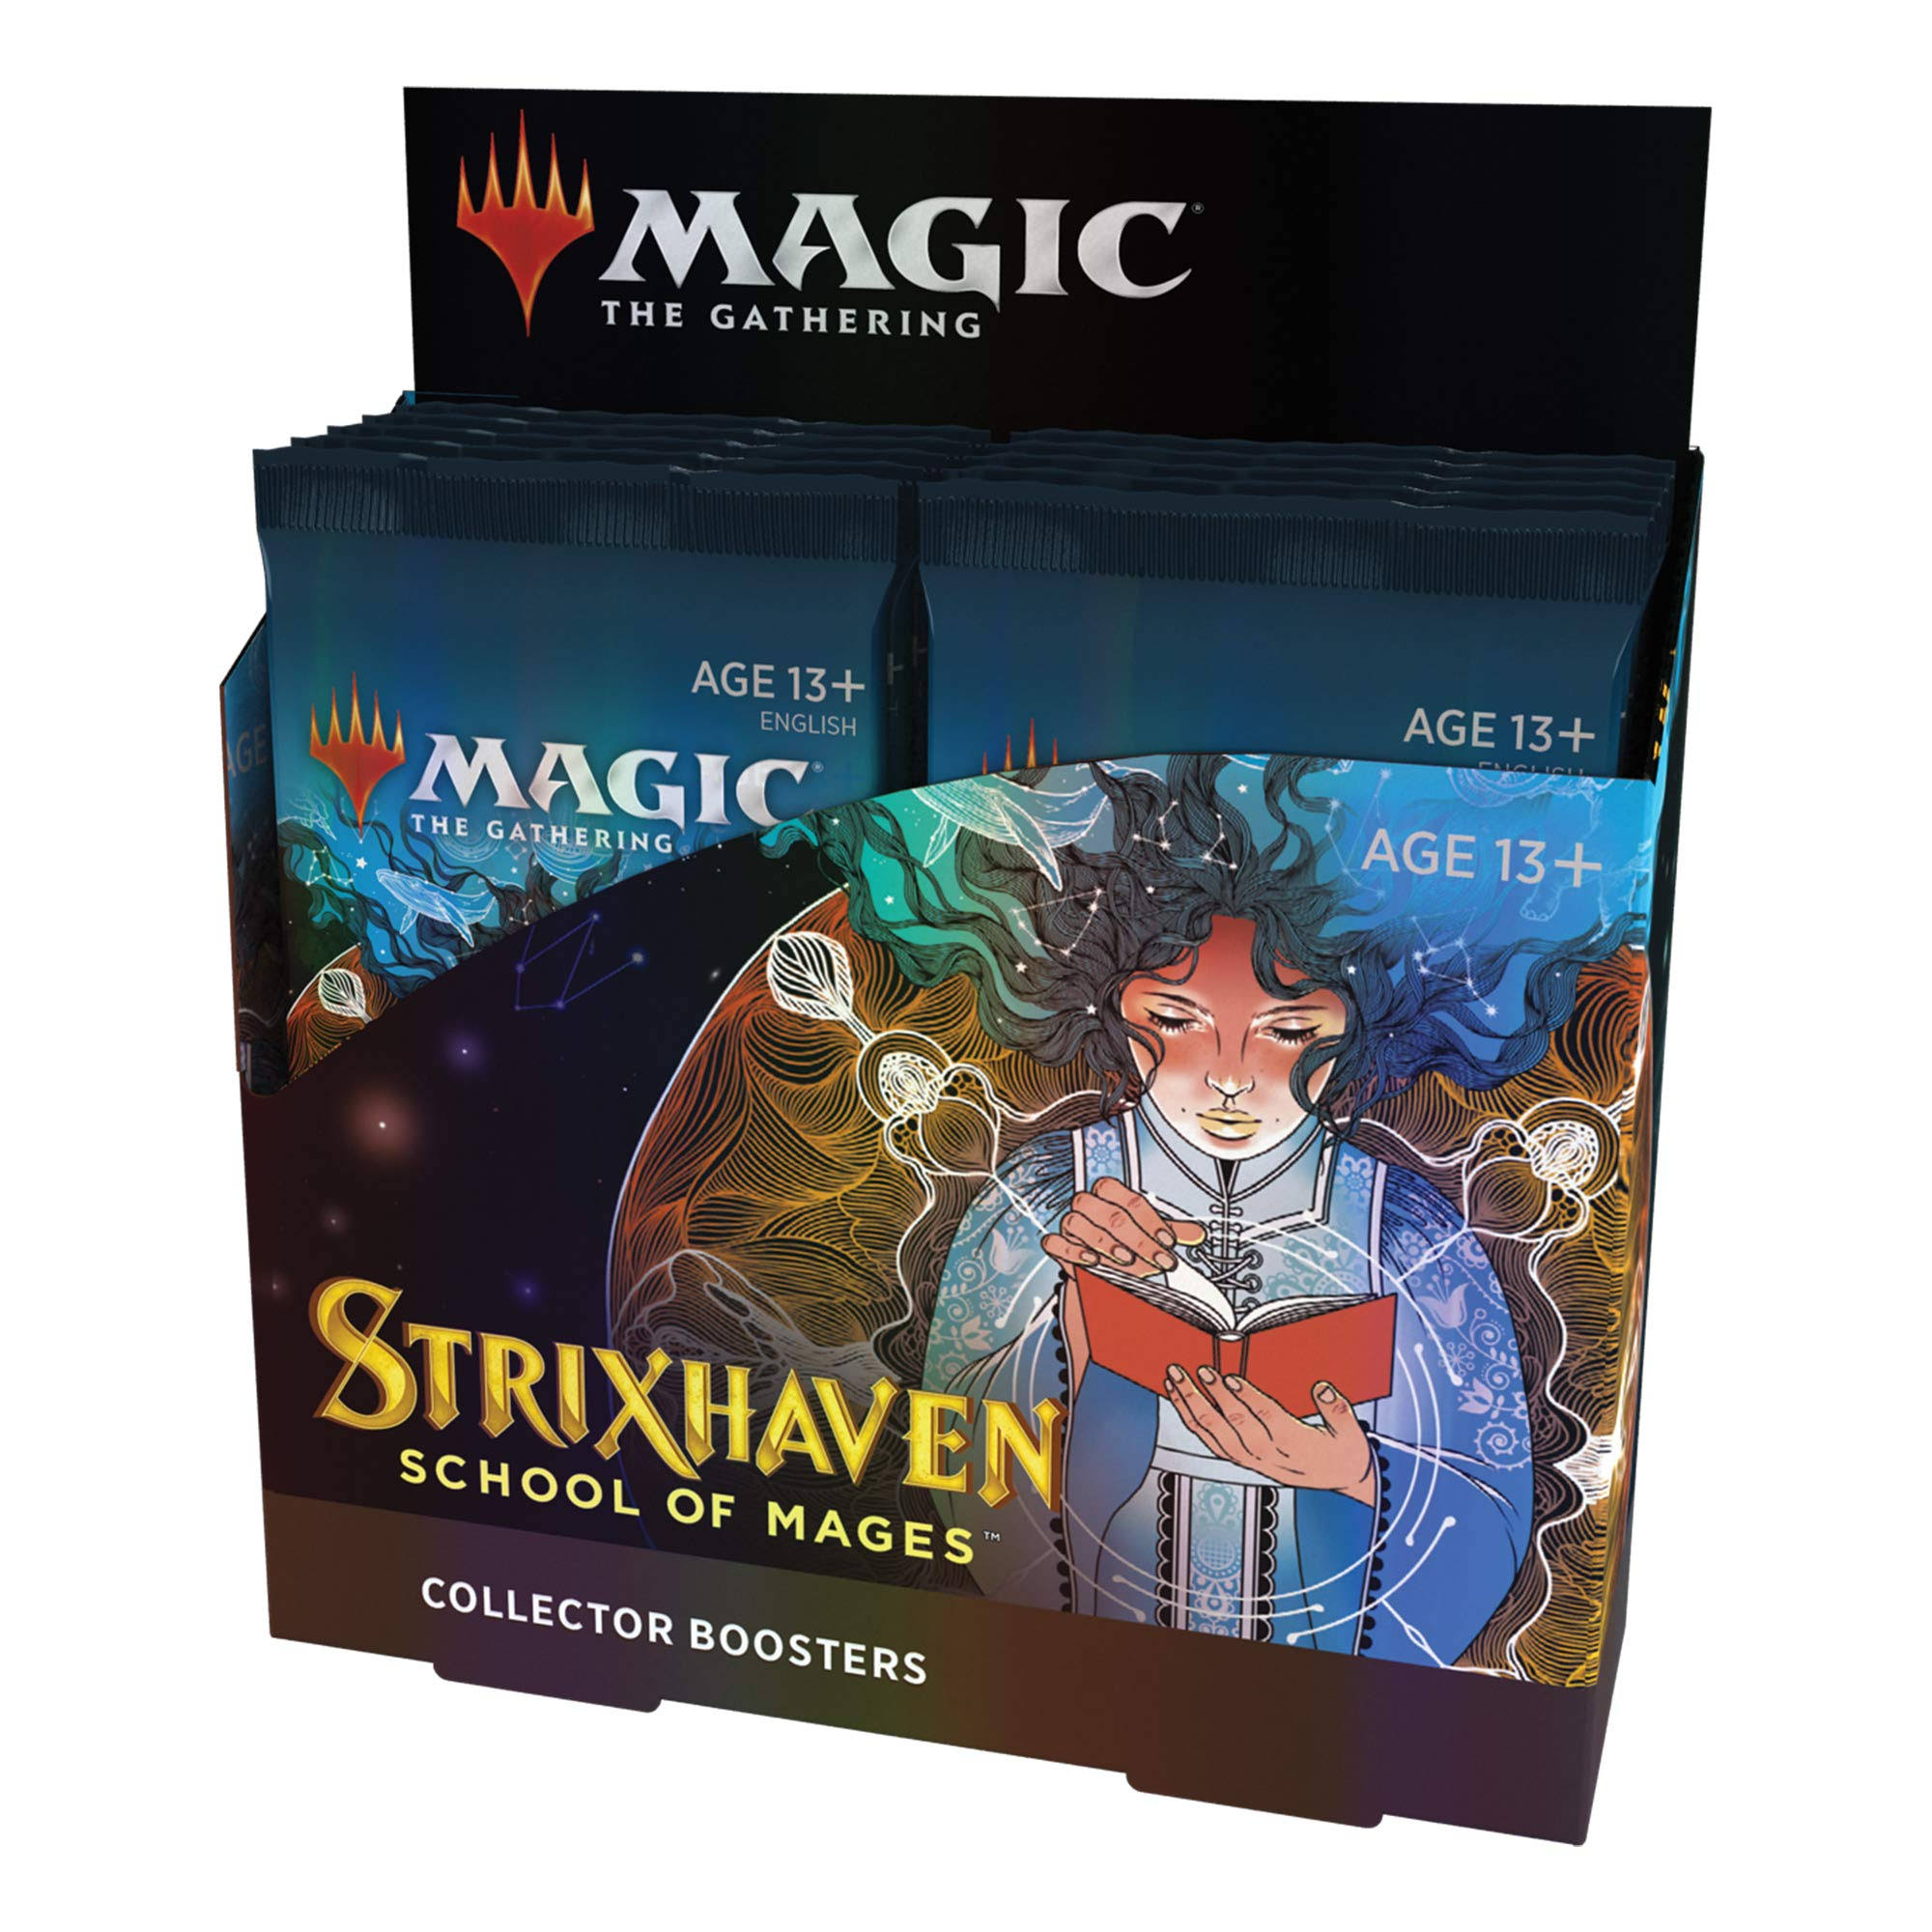 Magic The Gathering Strixhaven: School of Mages Collector Booster Box